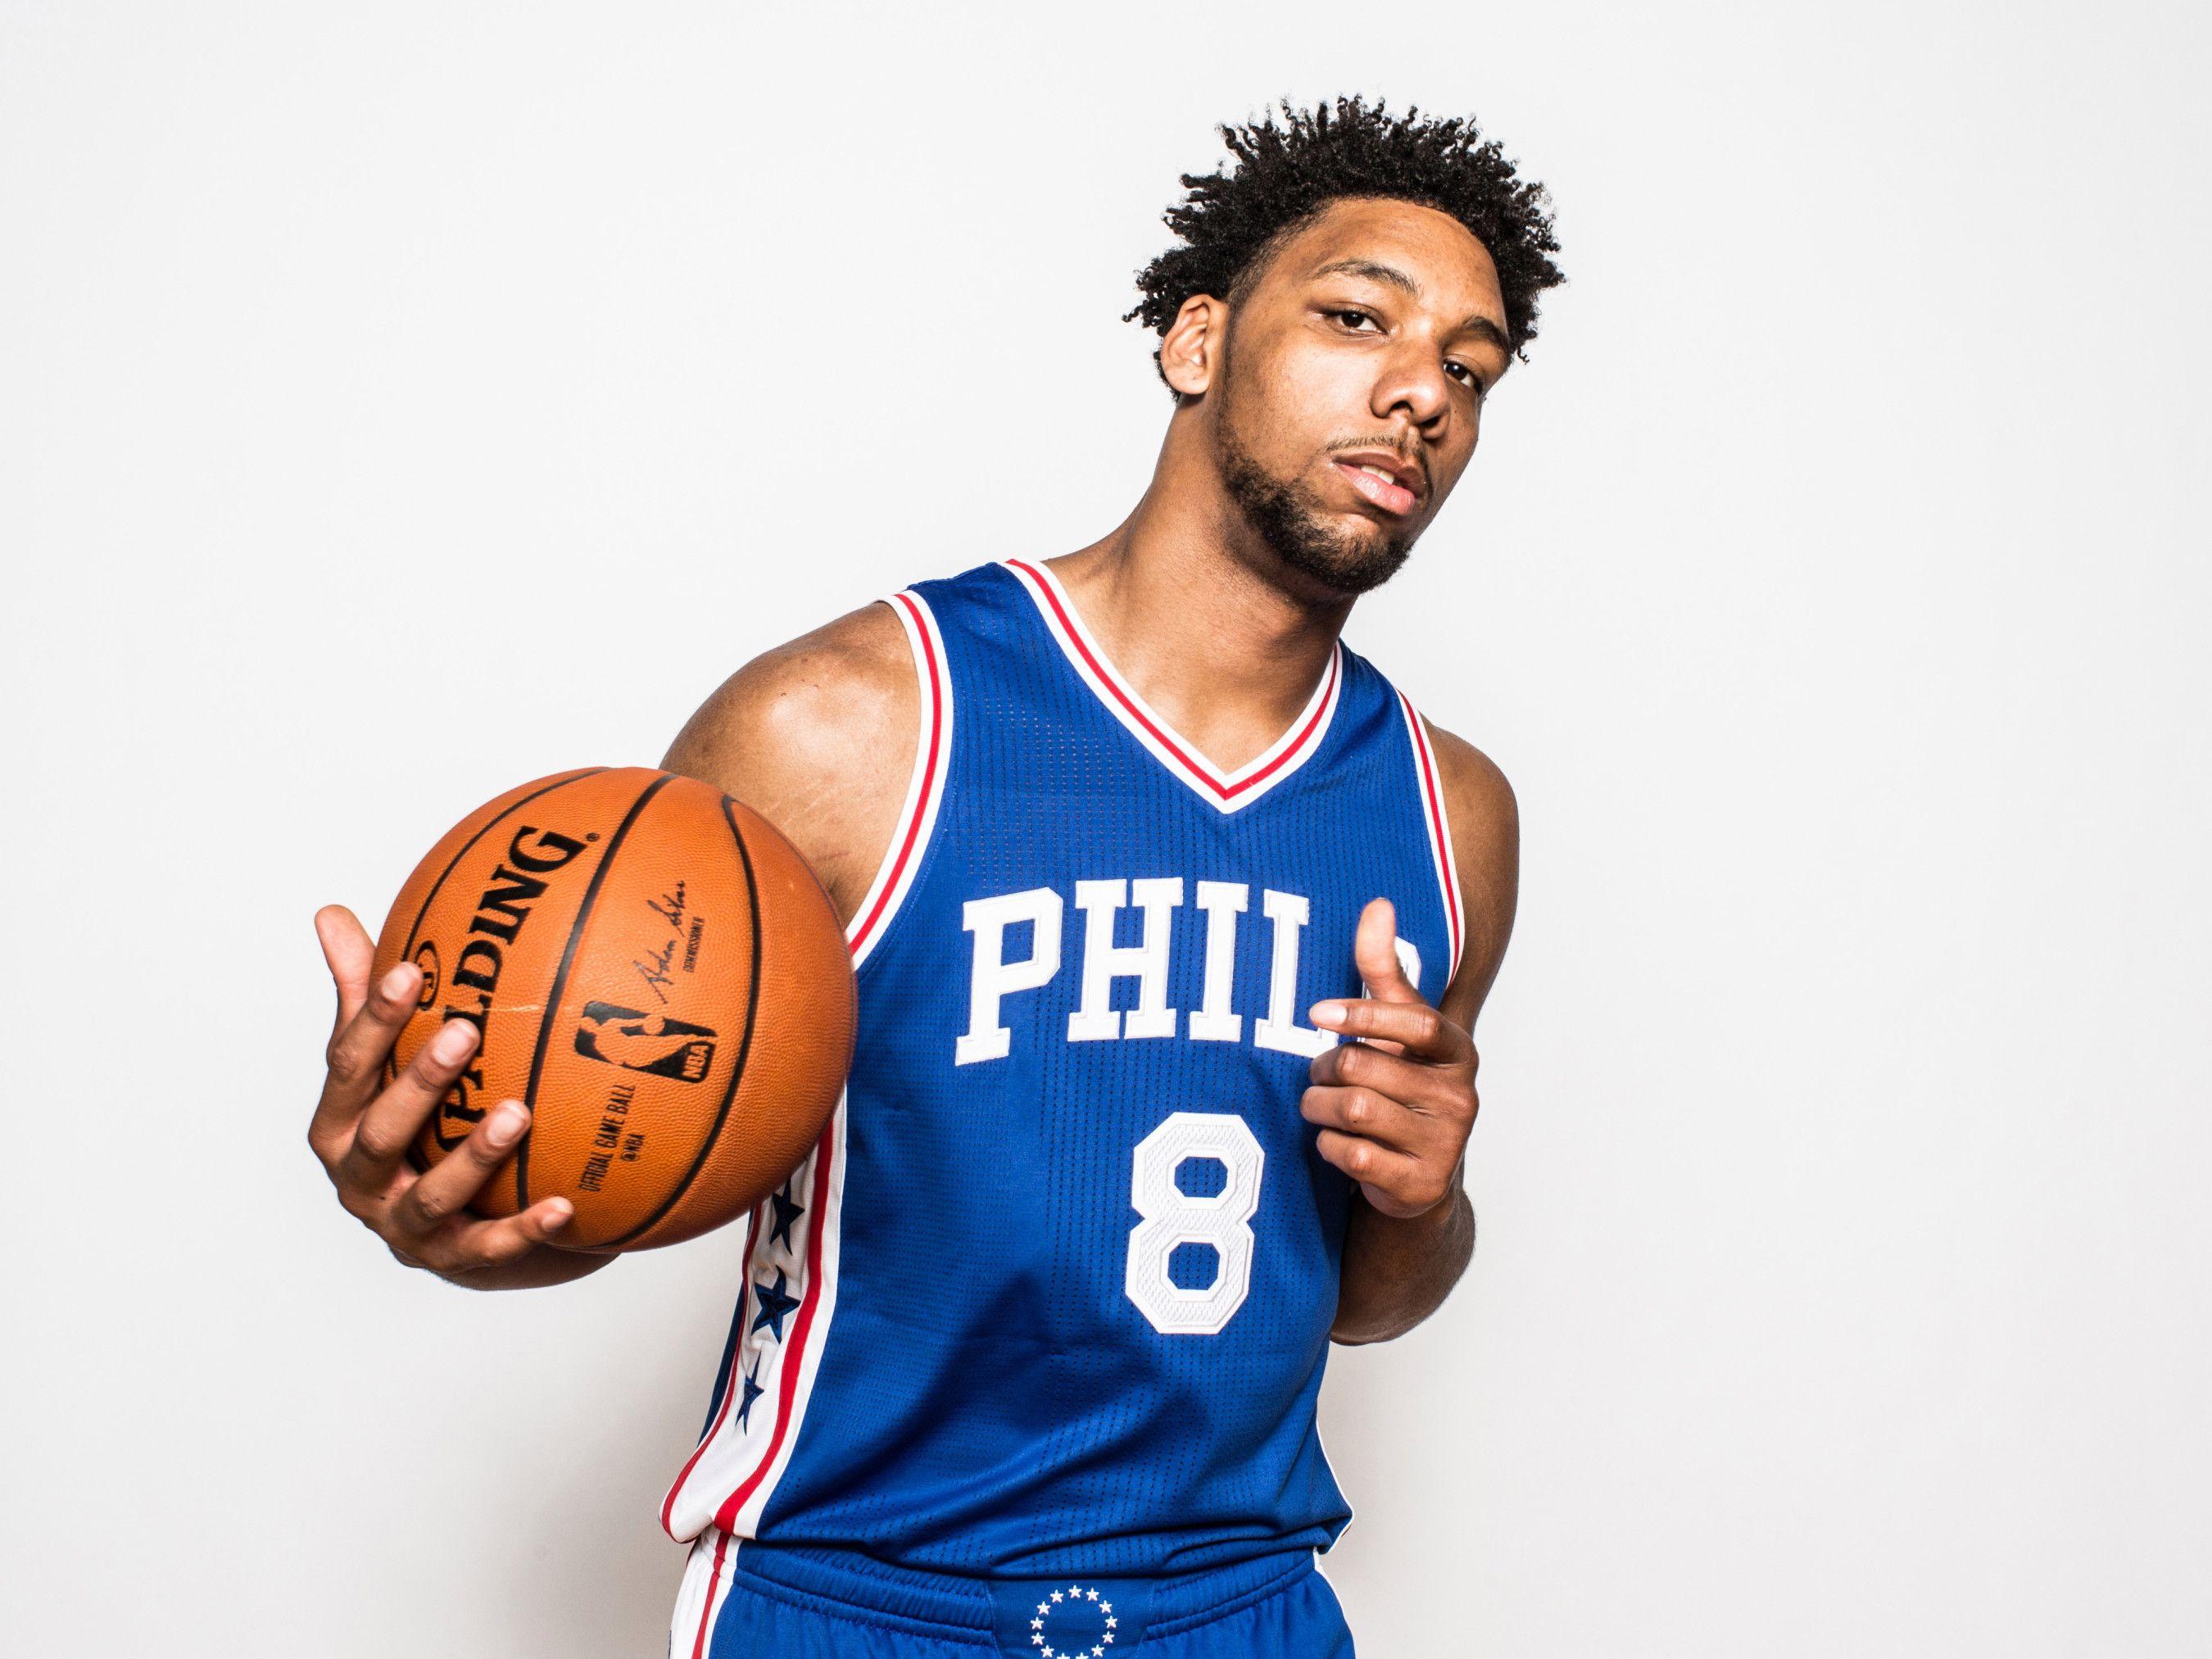 Does Jahlil Okafor Have A Place In Today's NBA?